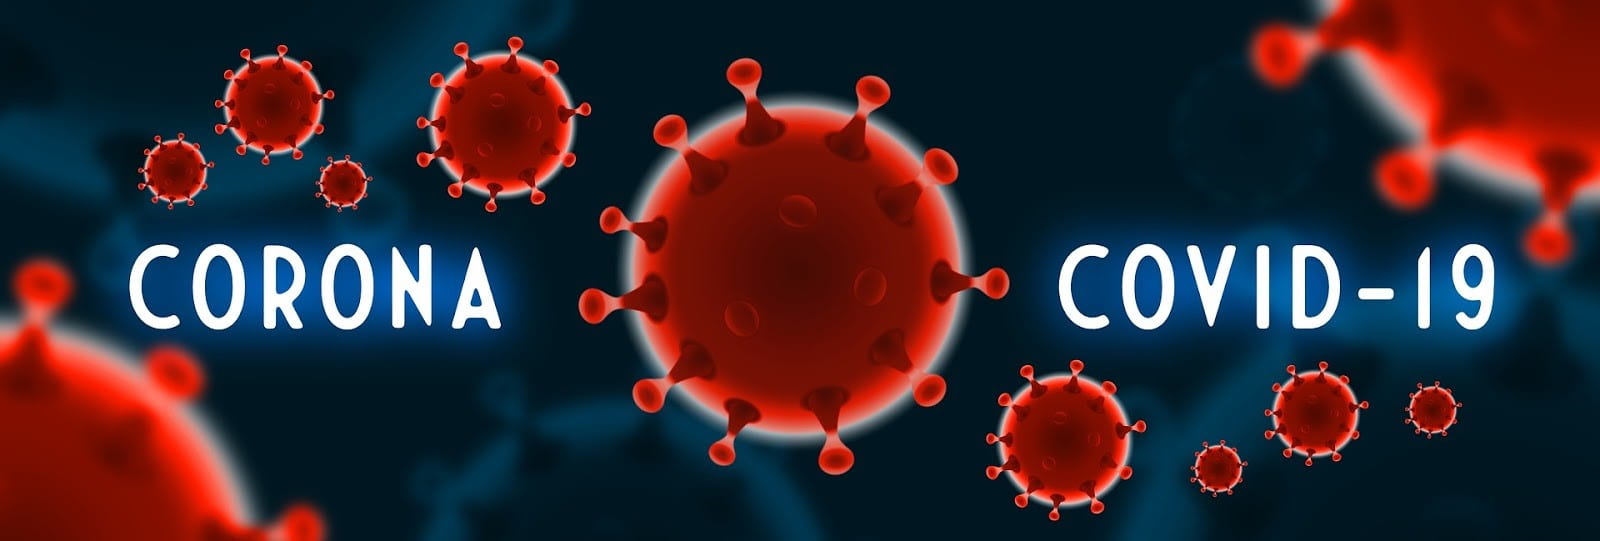 [Coronavirus is a spherical virus with small suction-cup-like attachments on the surface.]